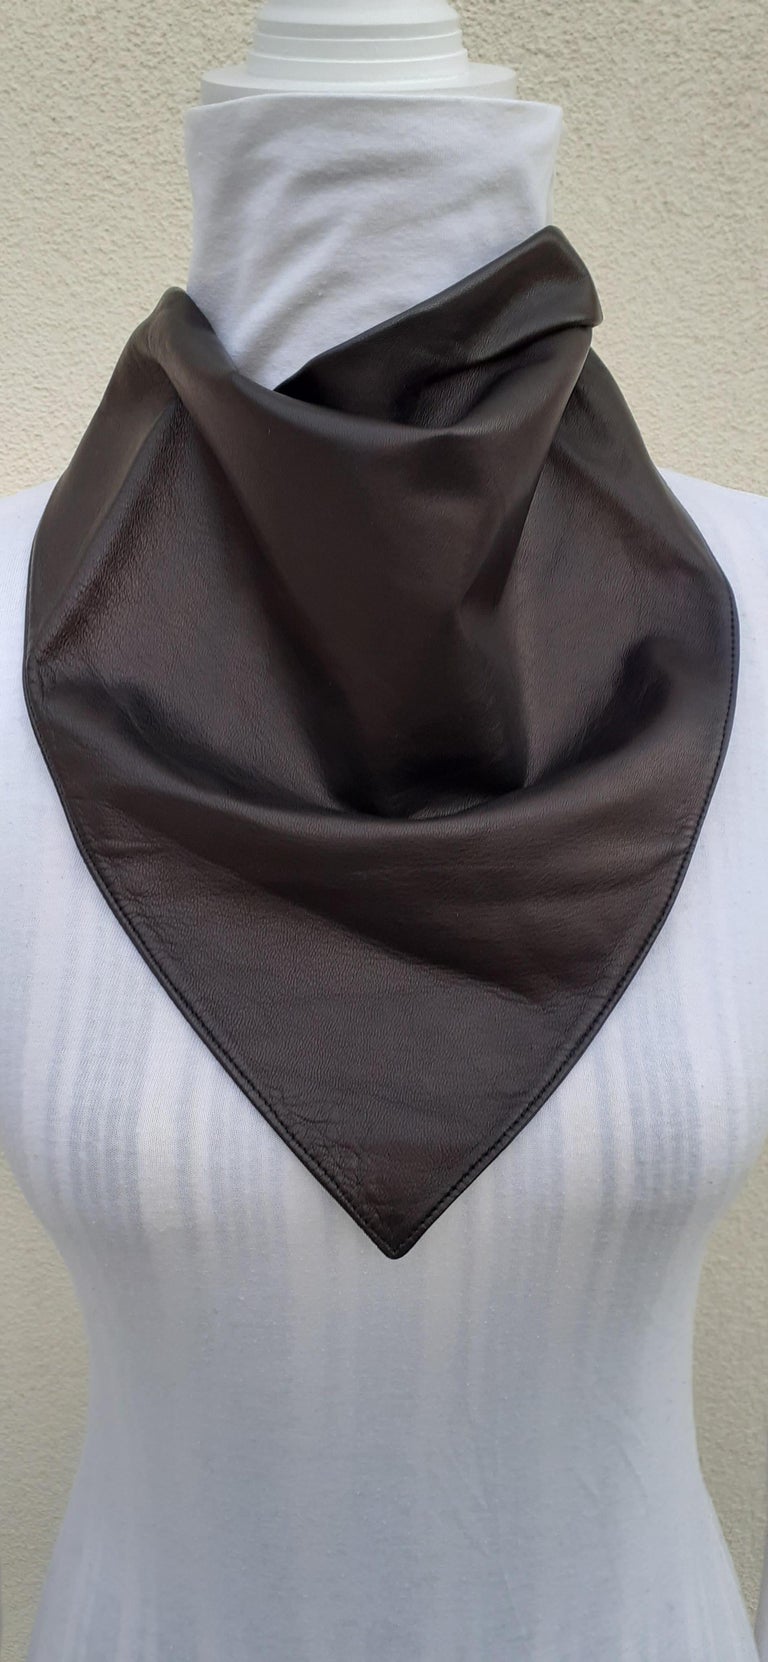 Black Exceptional Hermès Scarf Col Fichu Lambskin Leather Rodeo Bandana Texas RARE For Sale